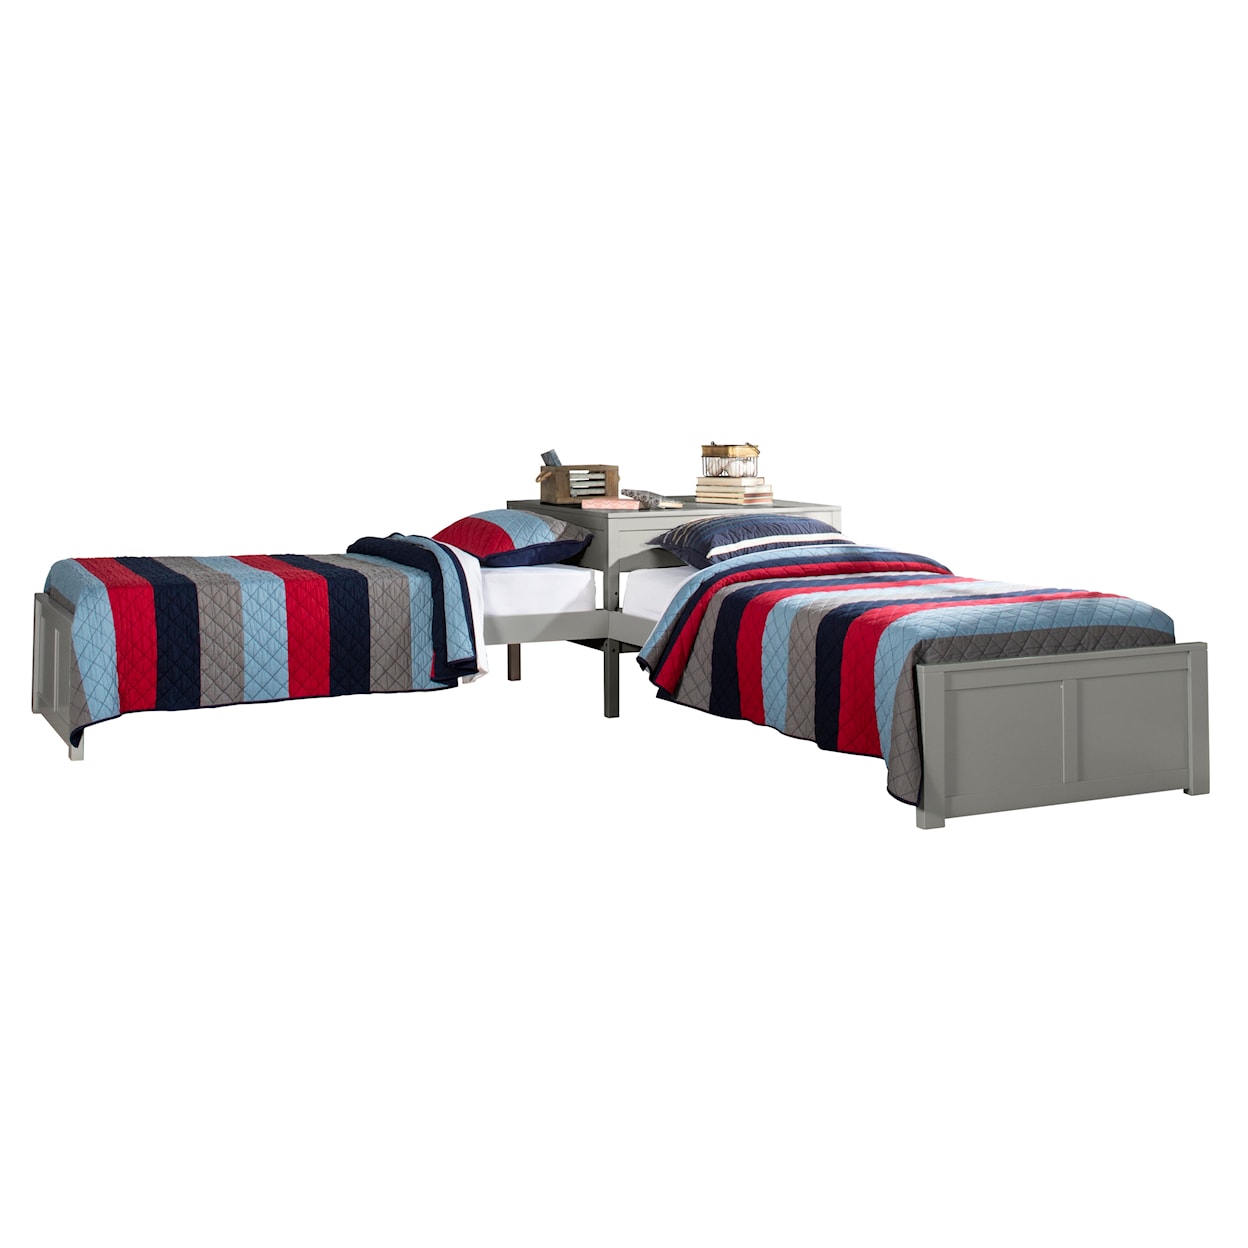 Hillsdale Pulse Twin Bed